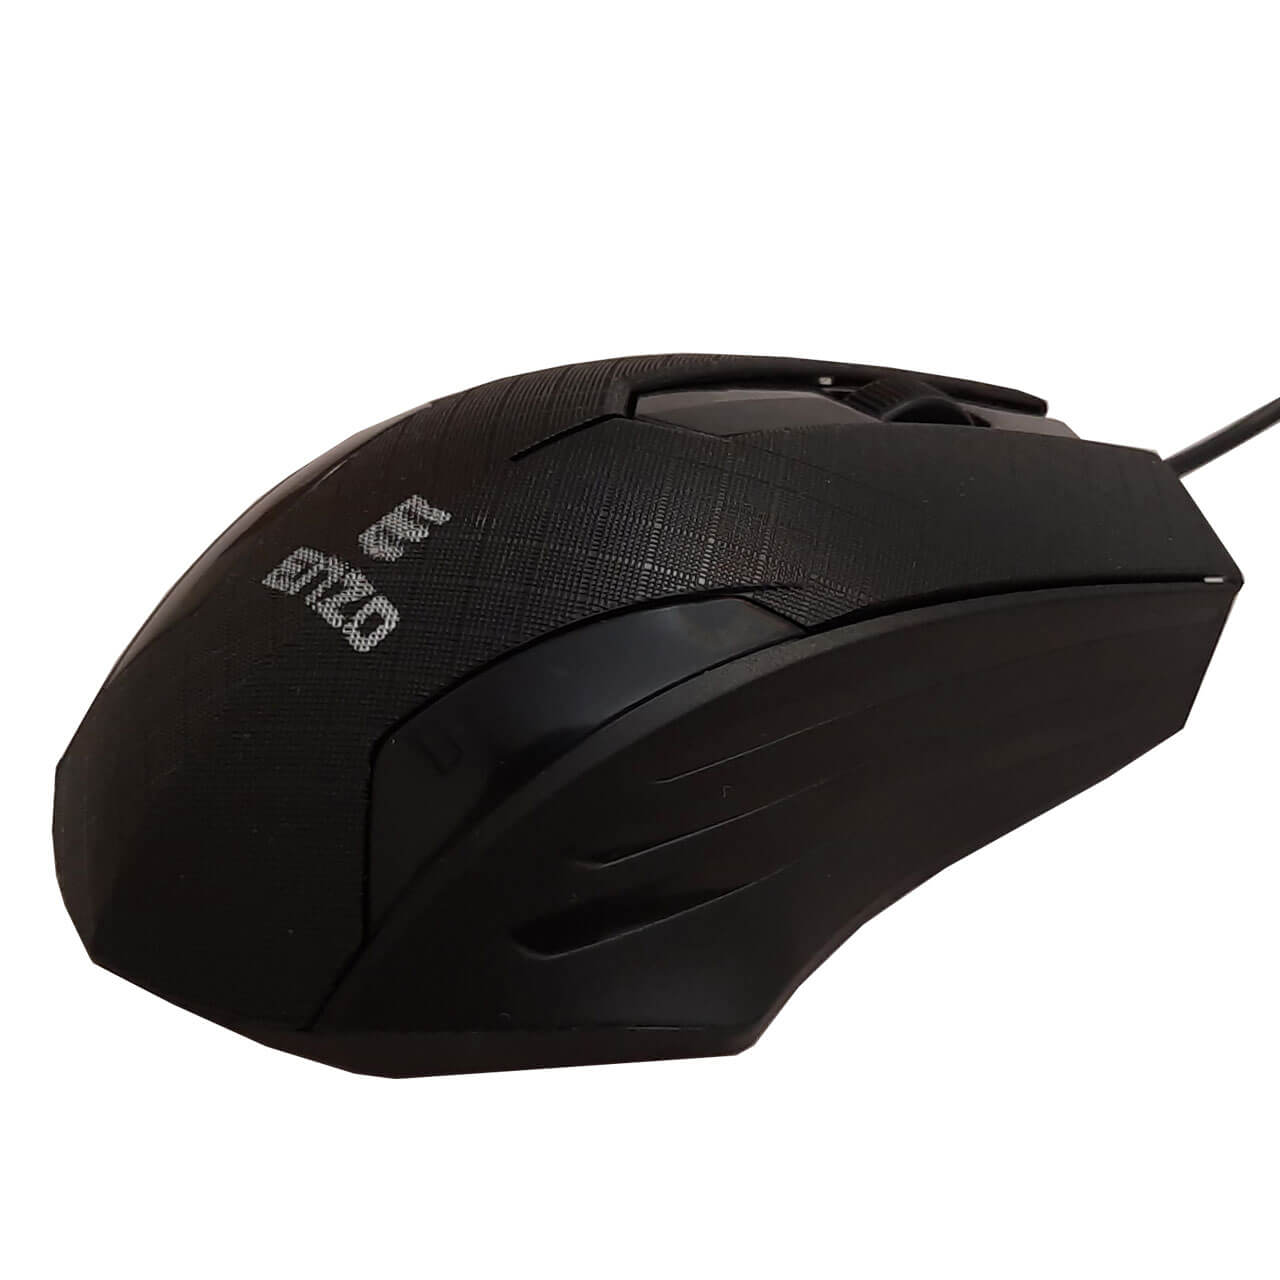 ENZO E600 Wired Optical Mouse%20(2)